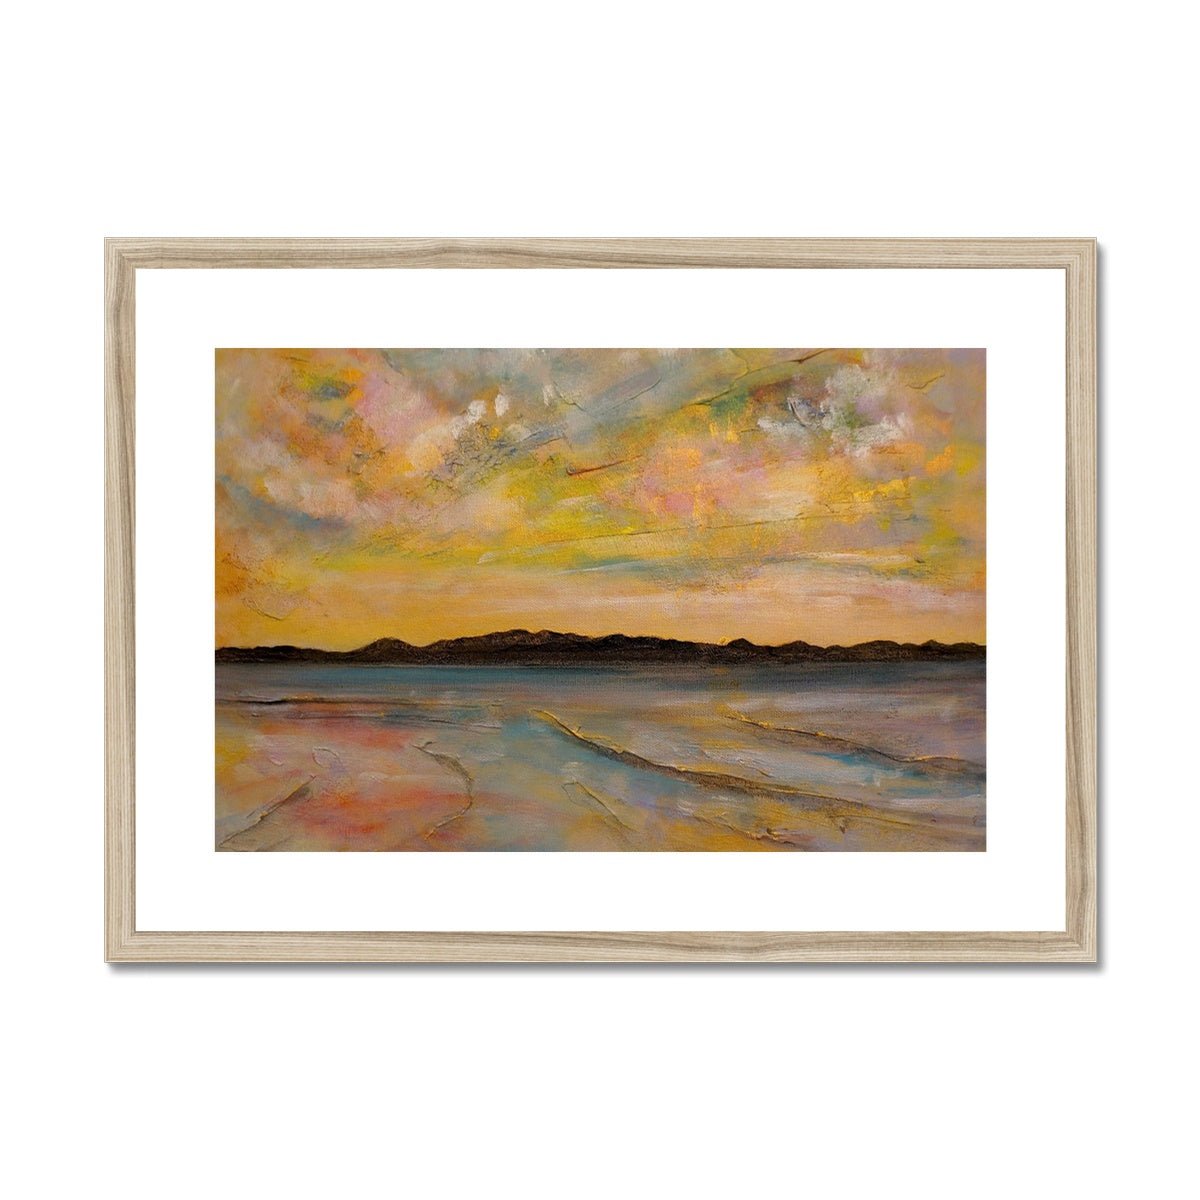 Vallay Island North Uist Painting | Framed & Mounted Prints From Scotland-Framed & Mounted Prints-Hebridean Islands Art Gallery-A2 Landscape-Natural Frame-Paintings, Prints, Homeware, Art Gifts From Scotland By Scottish Artist Kevin Hunter